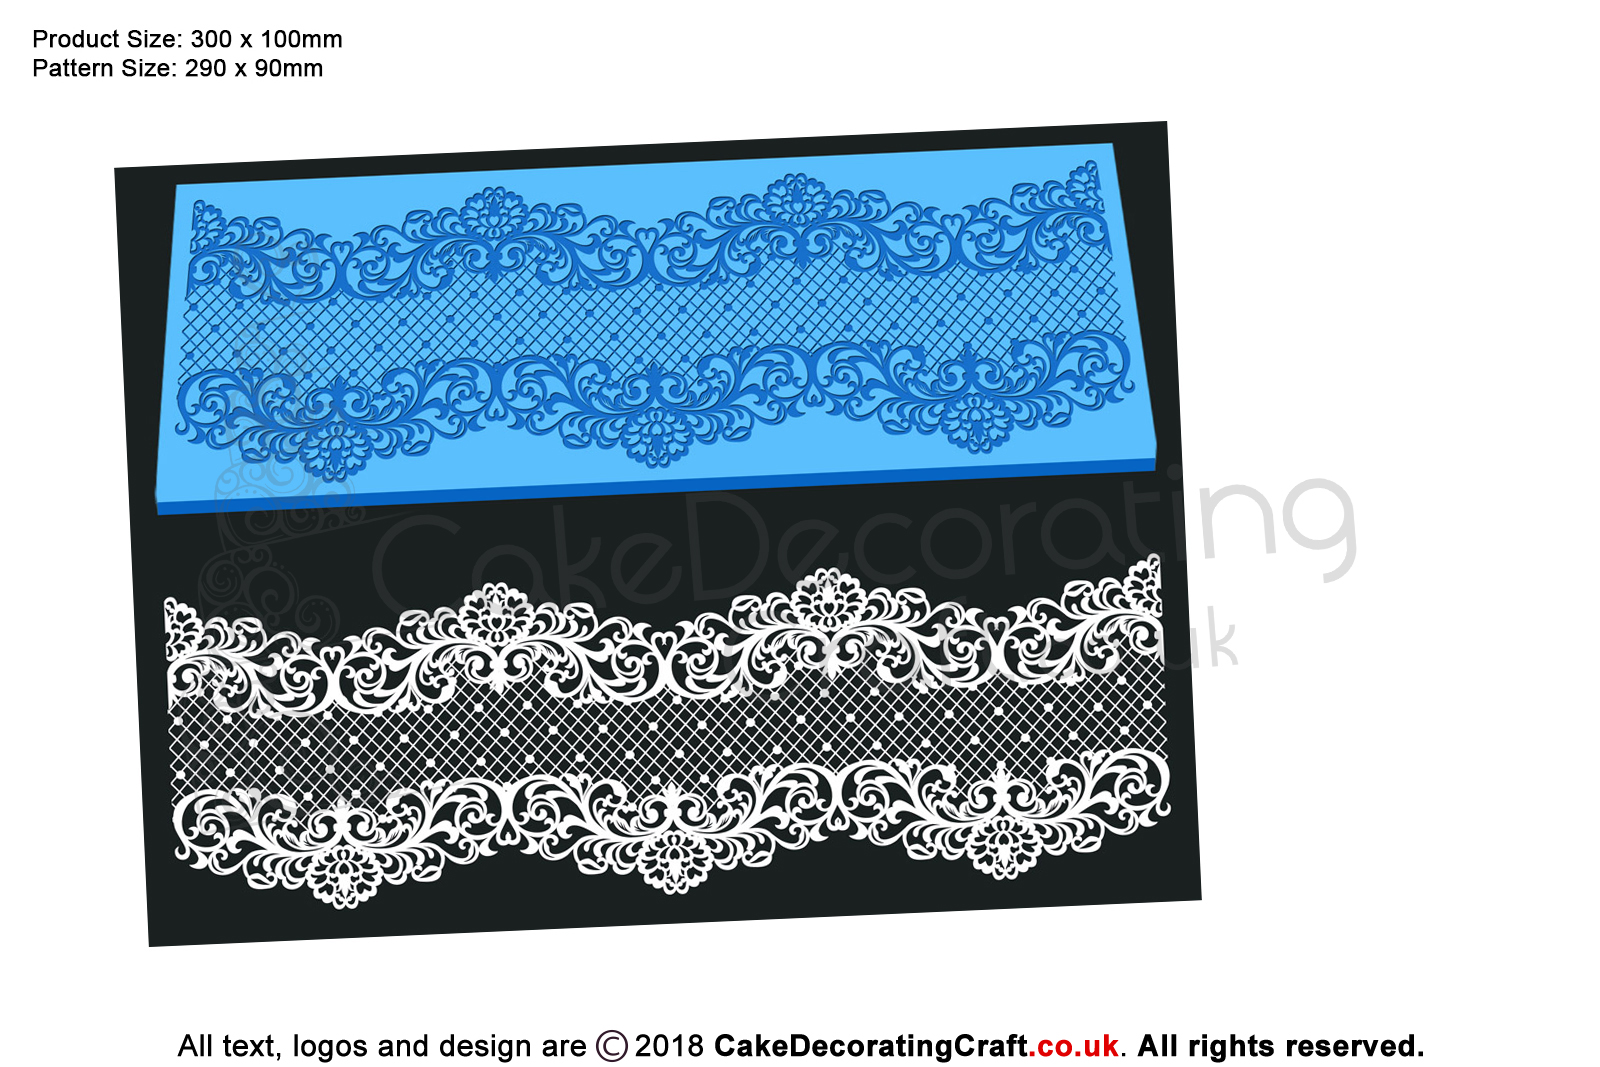 Serenity | Cake Lace Mats for Edible Cake Lace Mixes and Premixes | Cake Decorating Craft Tool